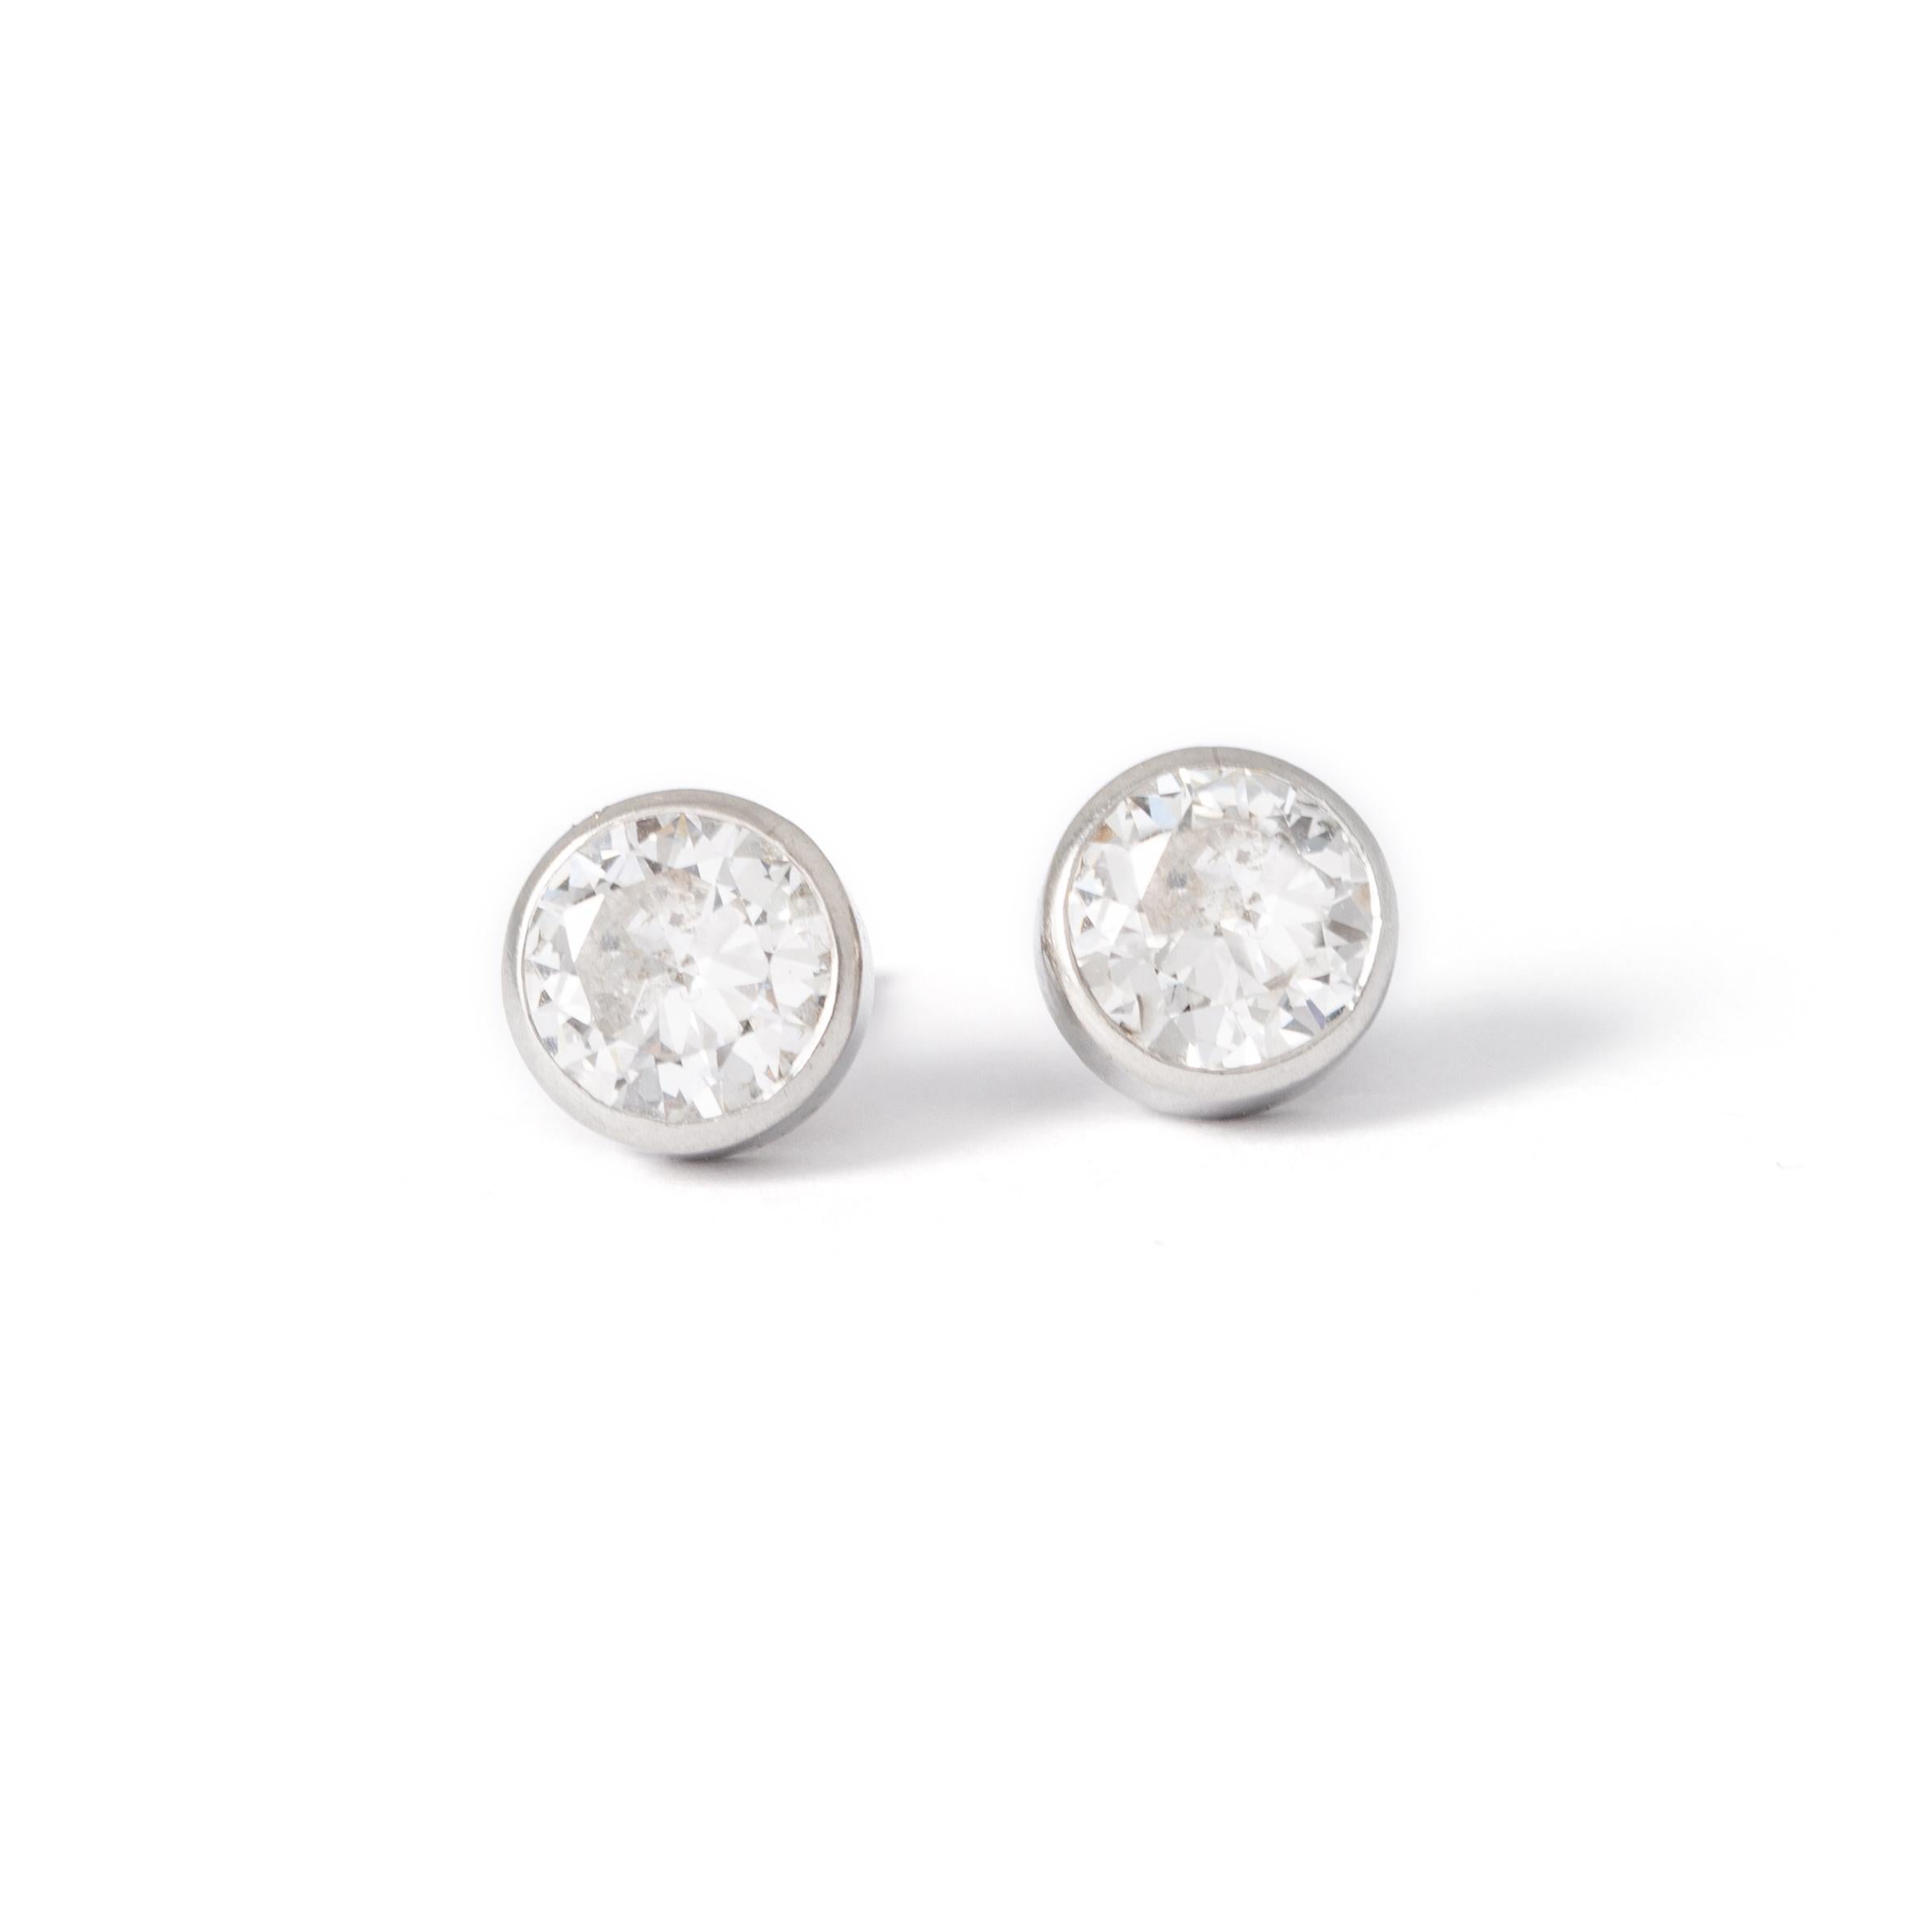 Pair of Diamond Ear studs on white gold 18K.
Round cut, in our opinion estimated to be H color, Vs clarity.
Total Diamond weight: Approximately 1.10 - 1.50 carats.
French assay mark for white gold 18K.